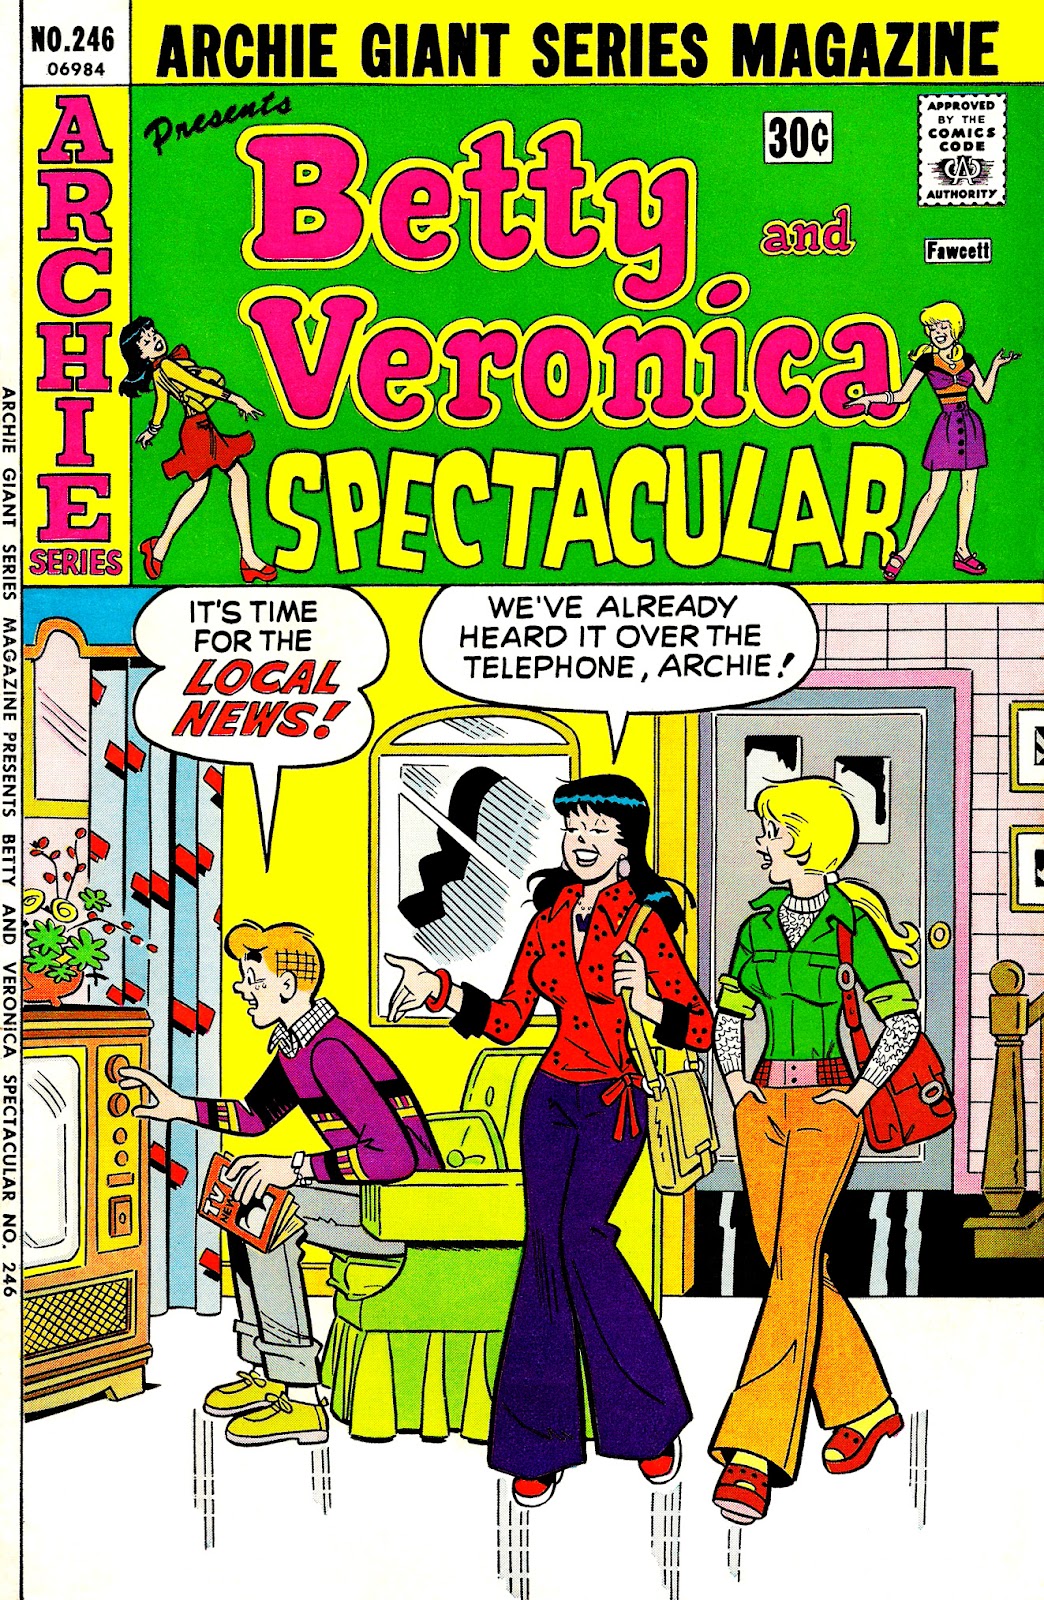 Archie Giant Series Magazine issue 246 - Page 1